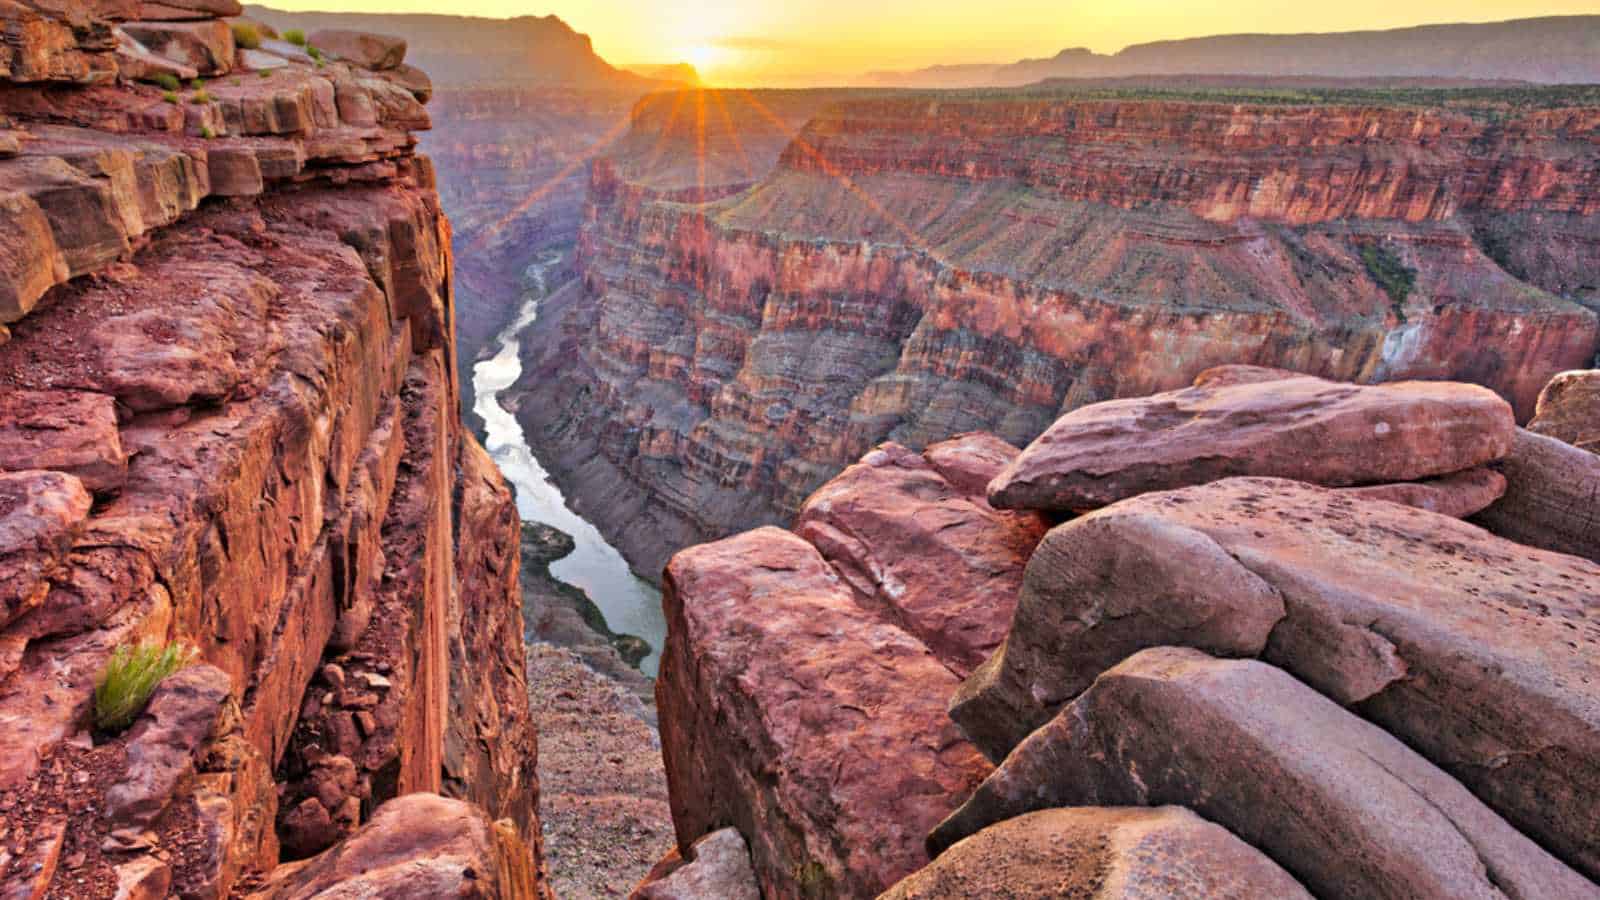 Sunrise at Toroweap in Grand Canyon National Park.